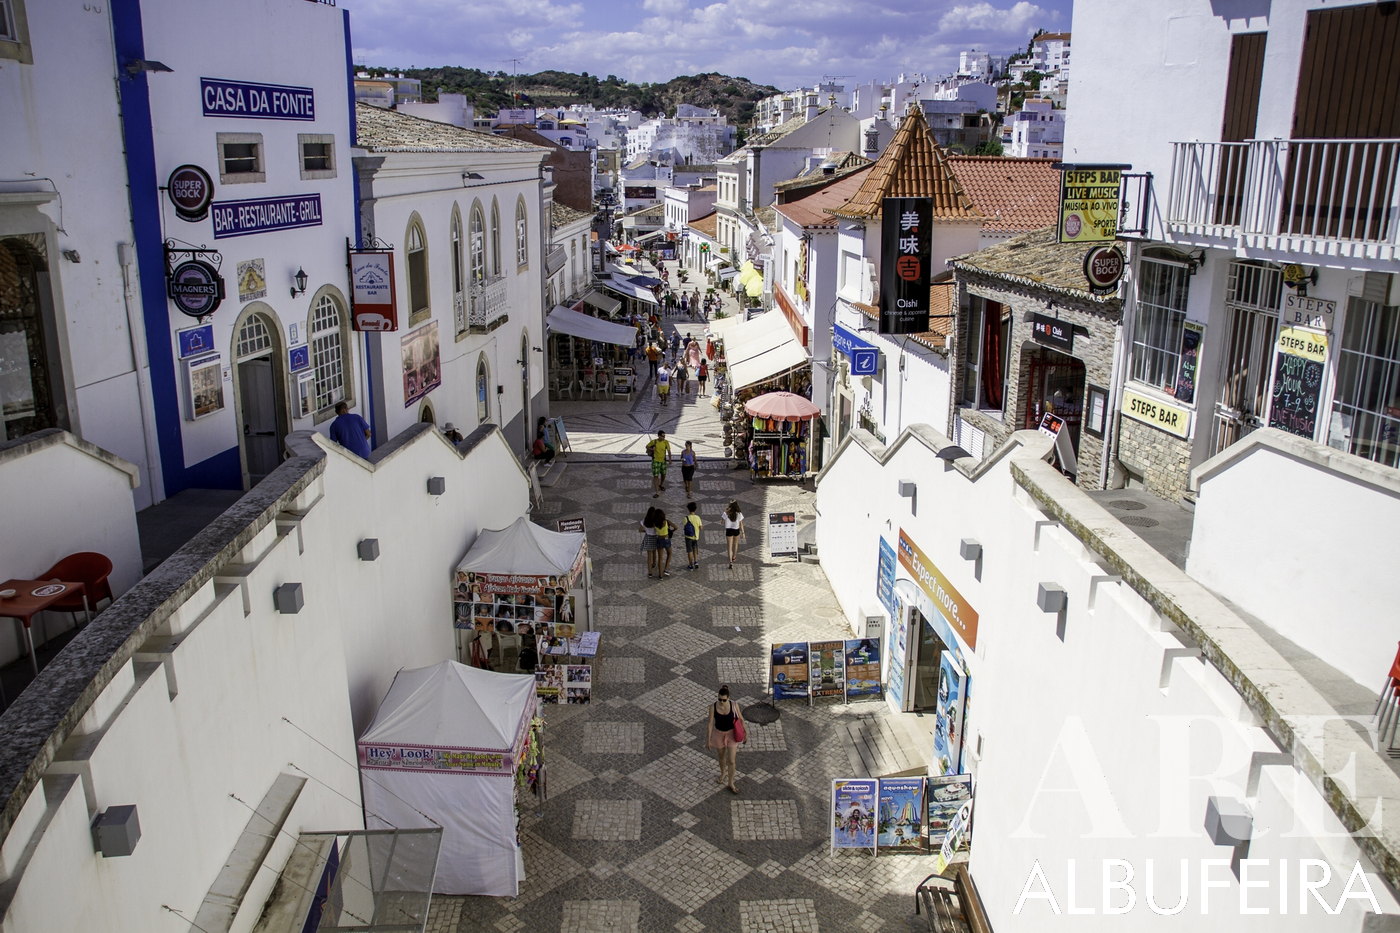 Albufeira city center street, paved with traditional 'pedra de calçada', bustling with a variety of shops offering souvenirs, lively bars, diverse restaurants, and an array of liquors.